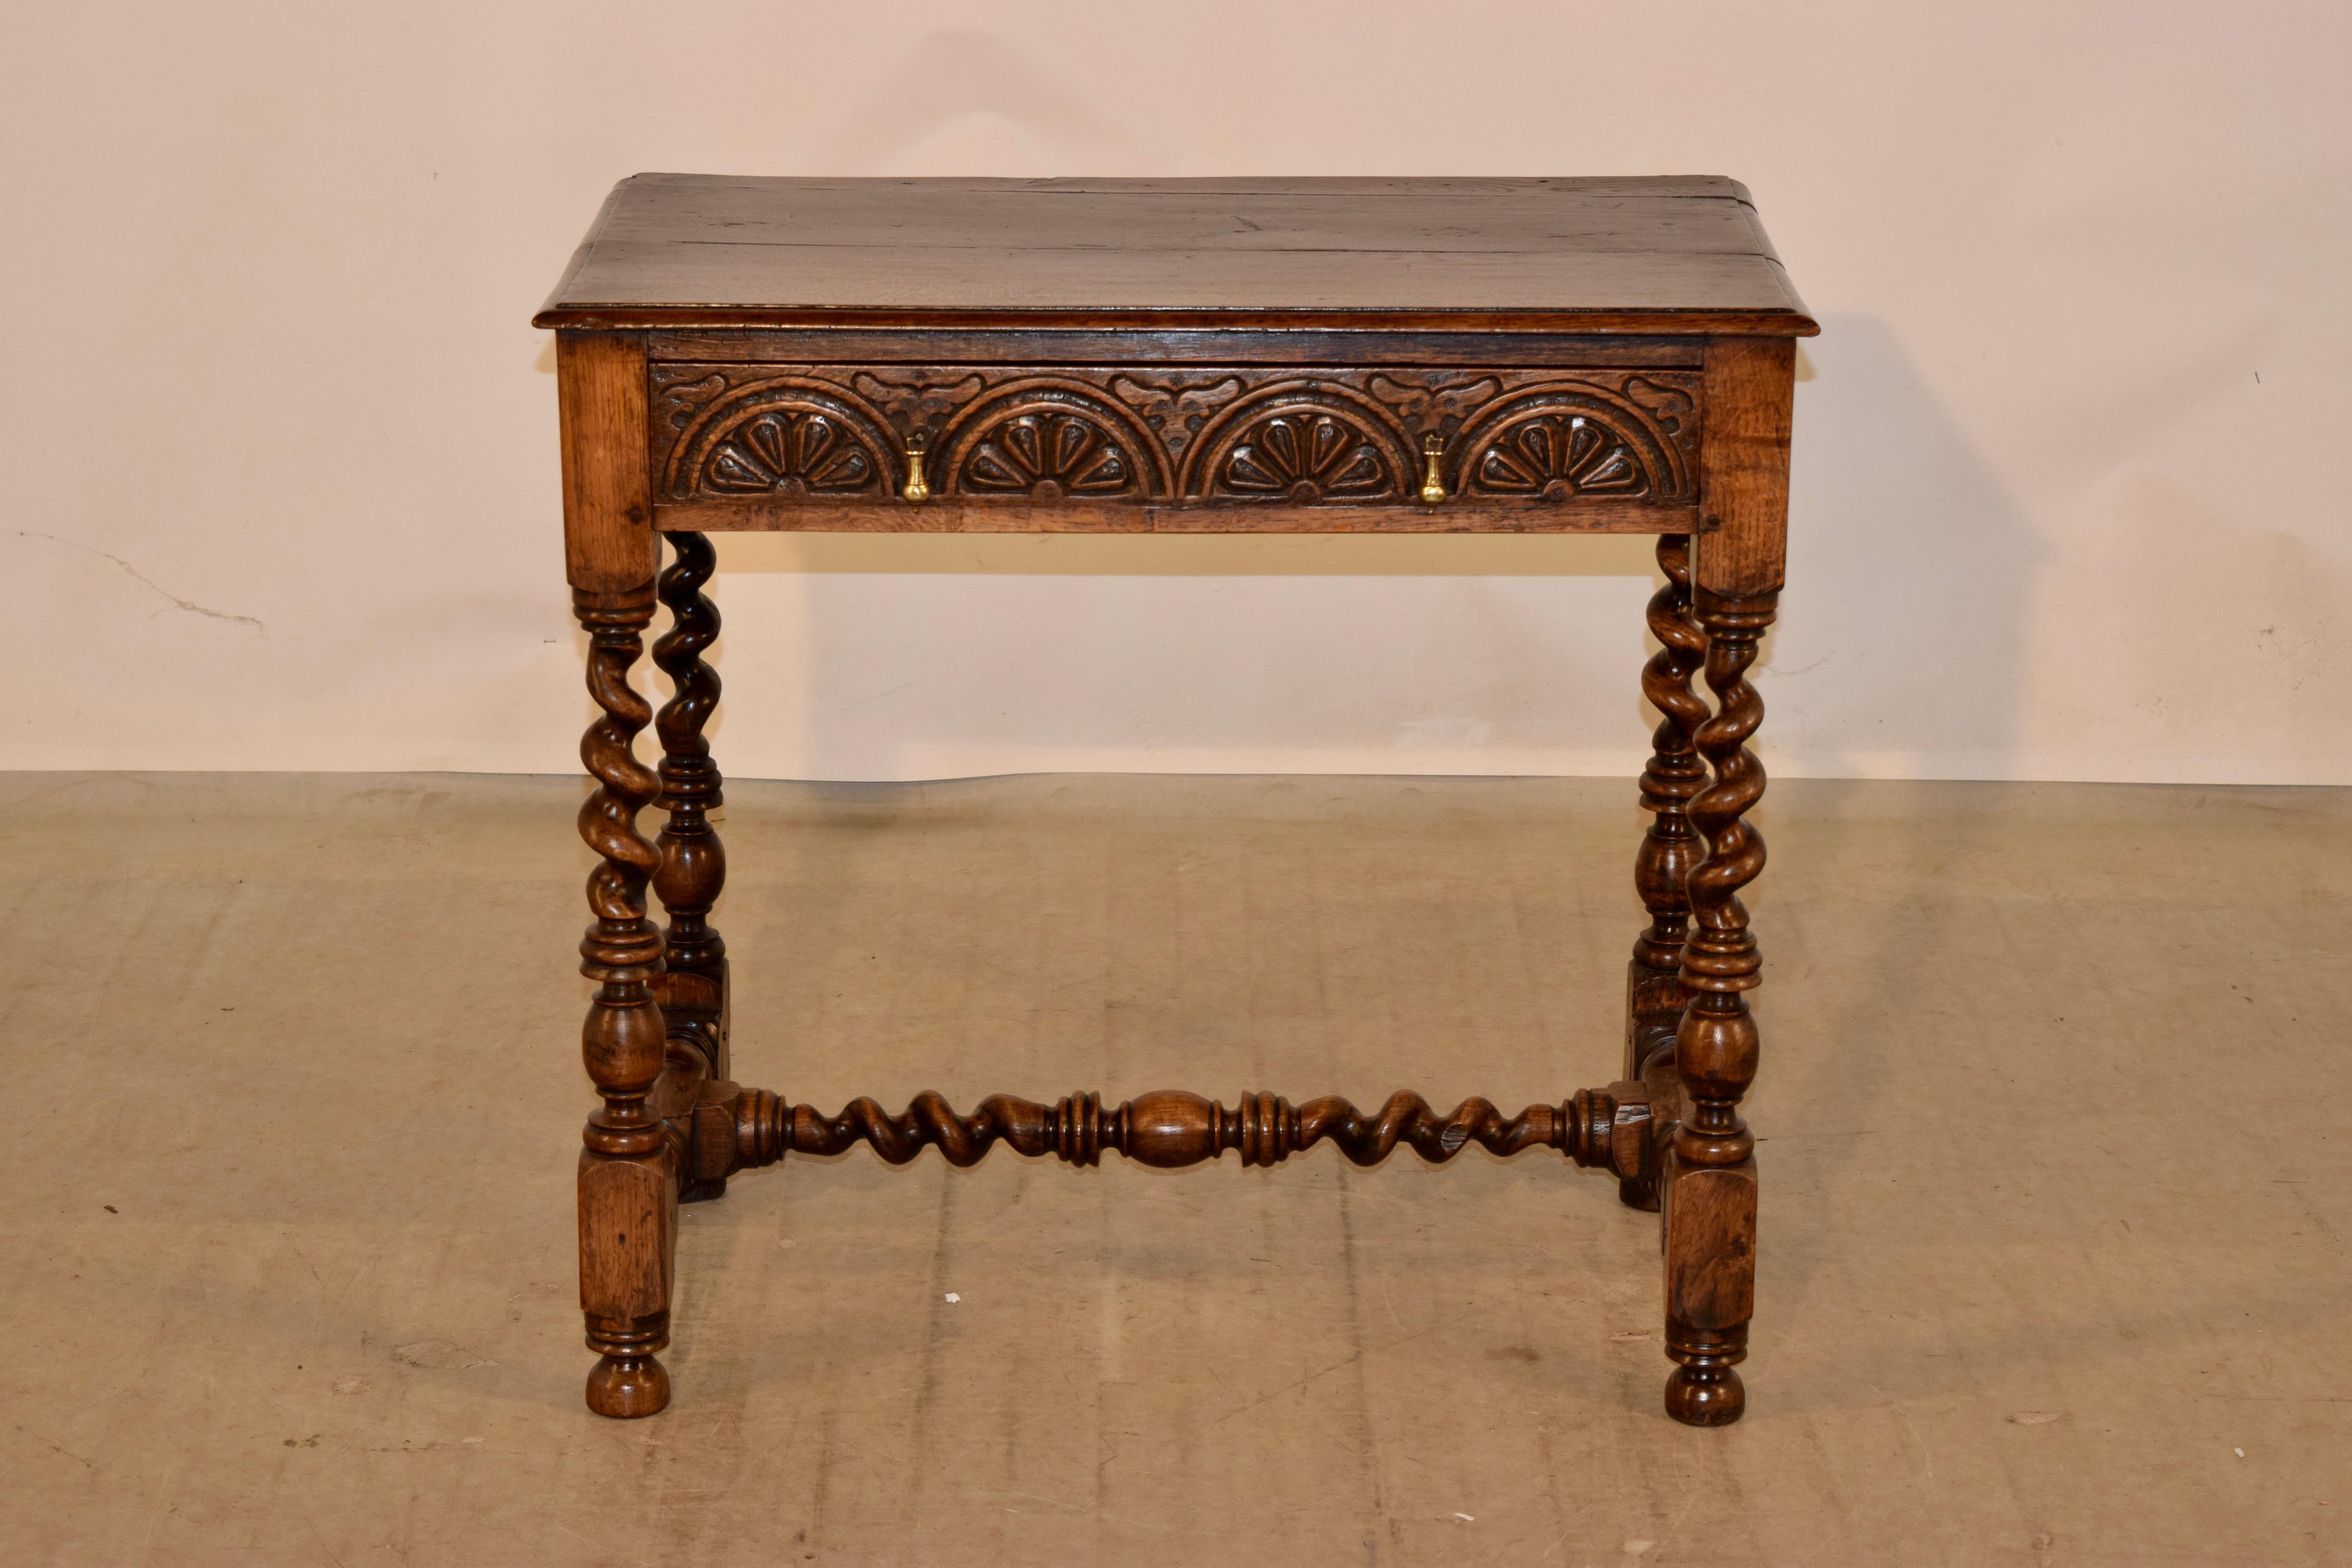 17th century oak side table from England with a plank top which has a beveled edge, following down to simple sides and containing a single drawer in the front. The drawer front is hand-carved decorated and has hand cast drop pulls. The table is